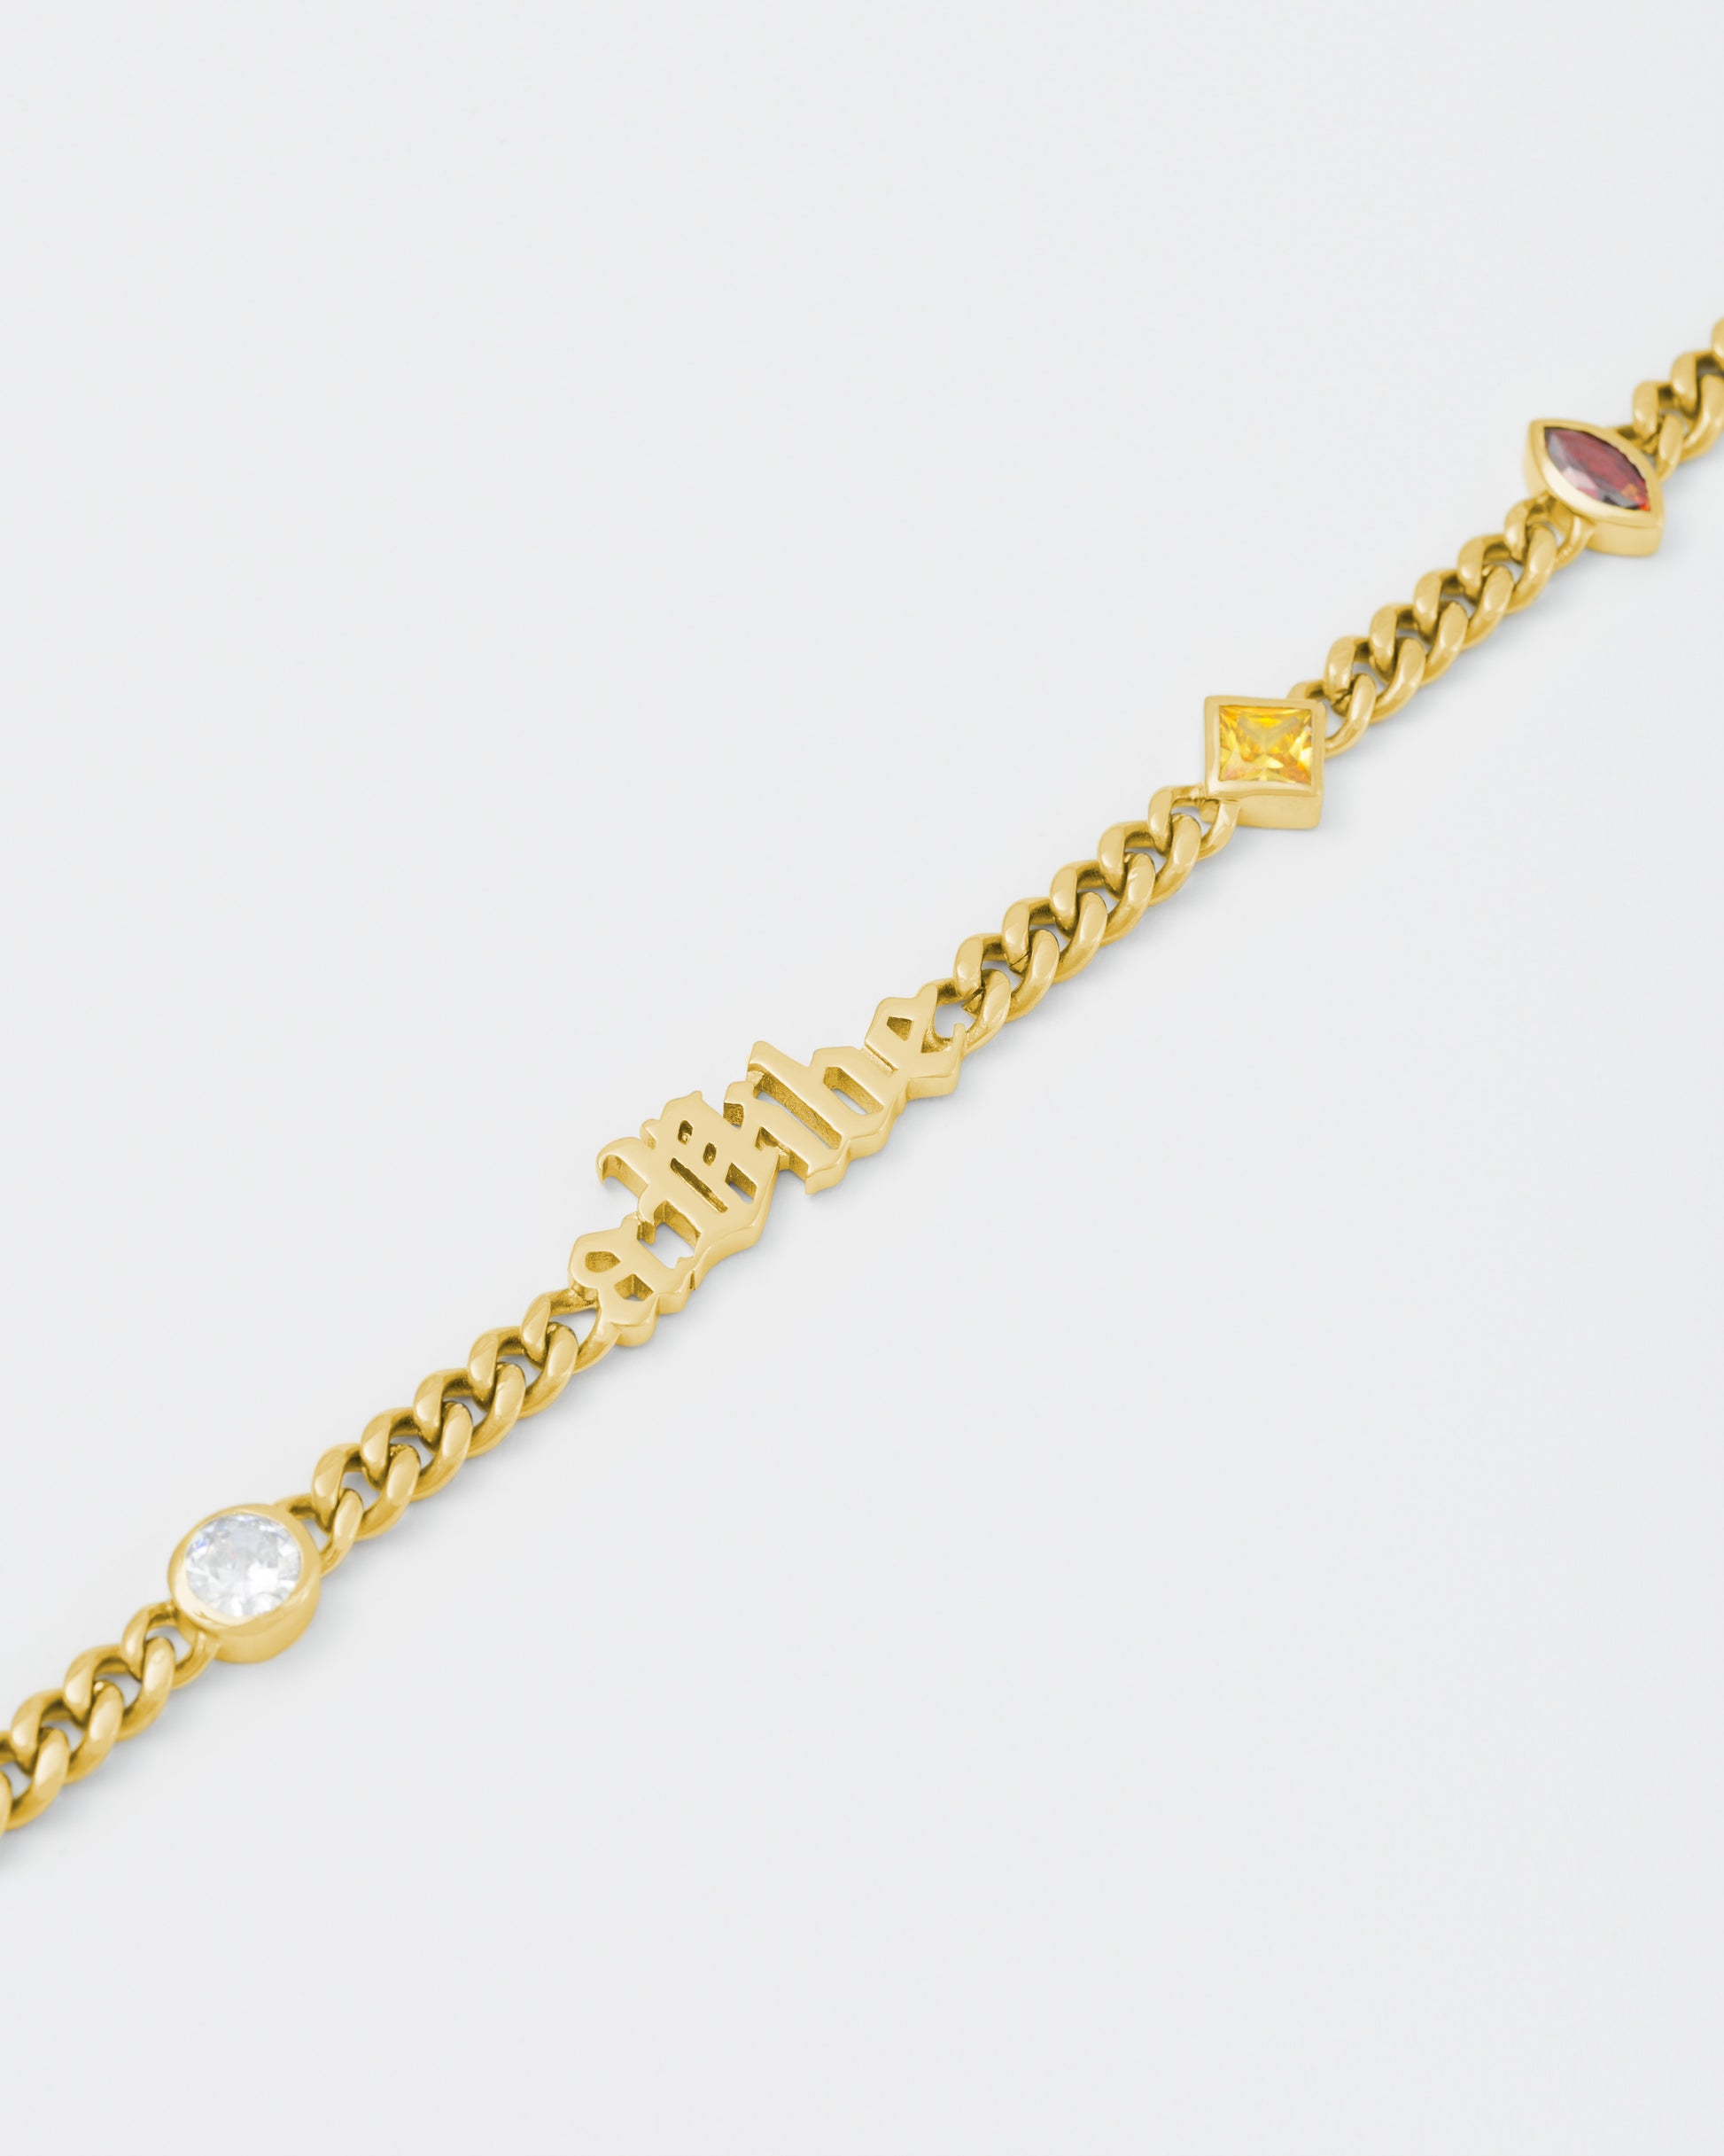 detail of A Vibe cuban chain necklace with 18kt yellow gold coating, mixed shape bezel stones in diamond white, yellow, garnet, tanzanite and "A Vibe" central metal tag. Lobster clasp with logo